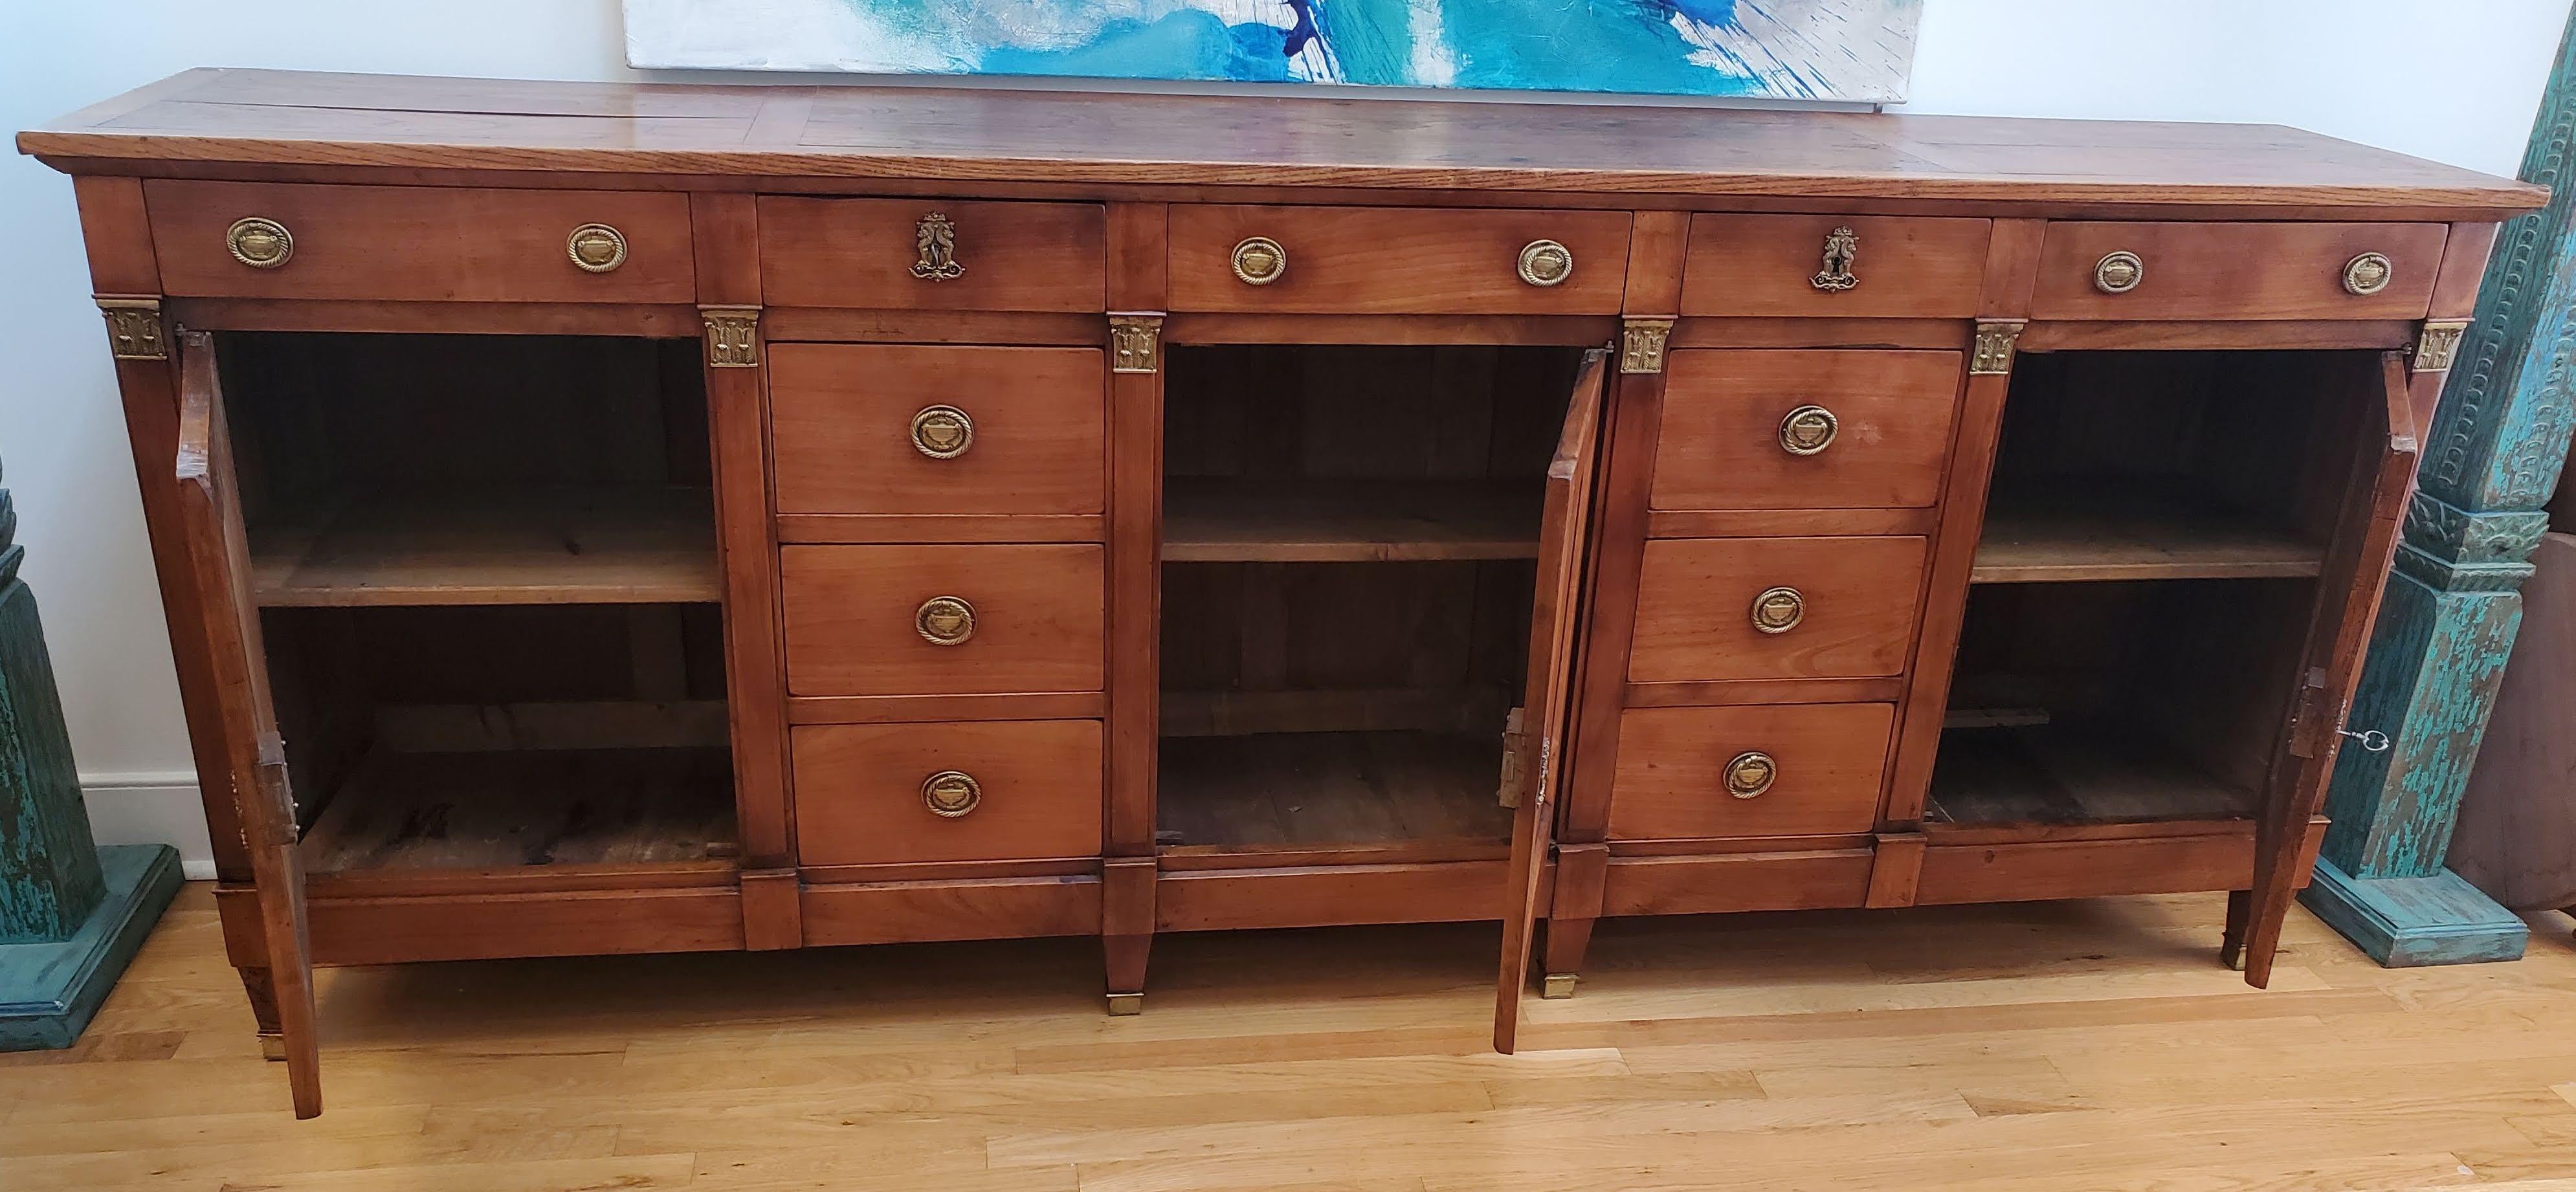 Fine quality French Provincial Louis XVI Enfilade (Long Buffet). Wonderful narrow proportions. Made predominately of richly patinated pearwood with a paneled top made of highly figured Elm. Three paneled cupboards and eleven drawers, all framed with